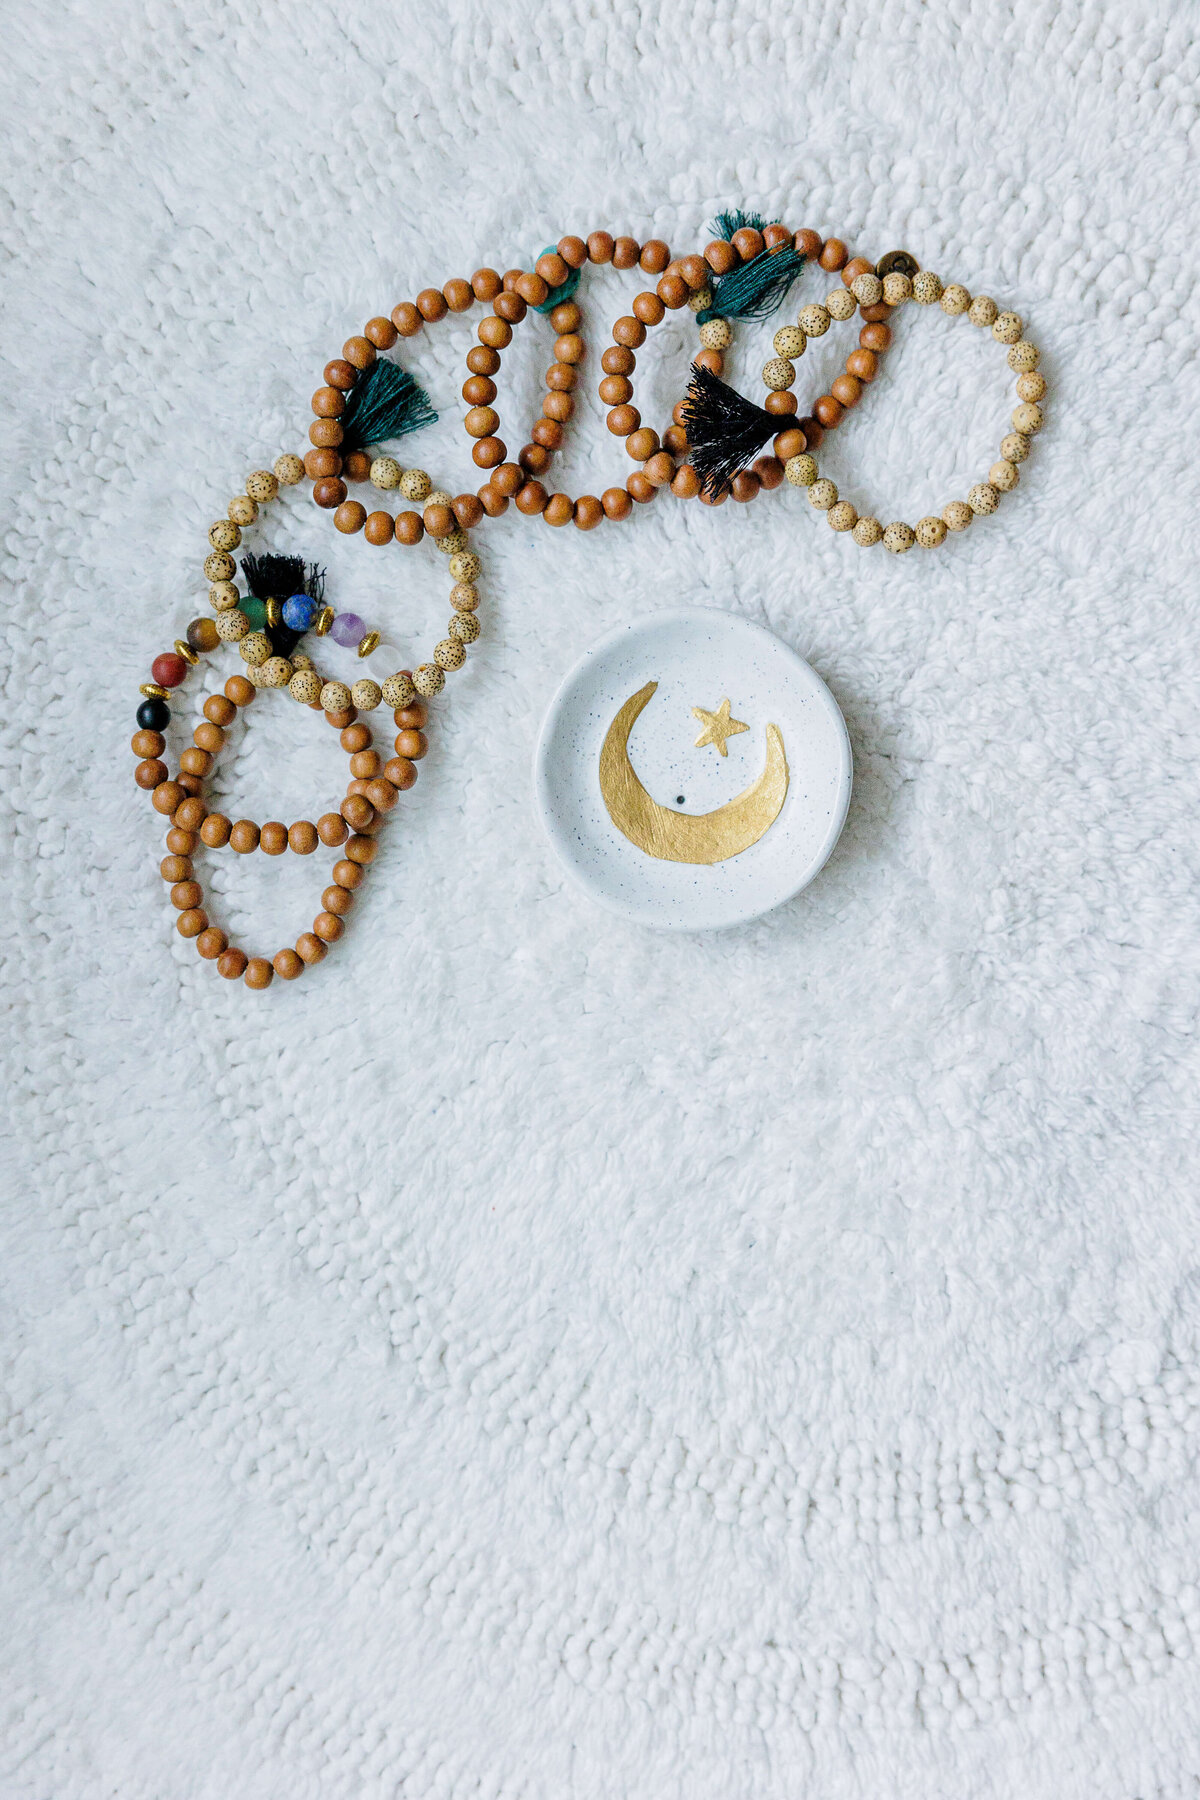 Bracelets and bowl with moon and star